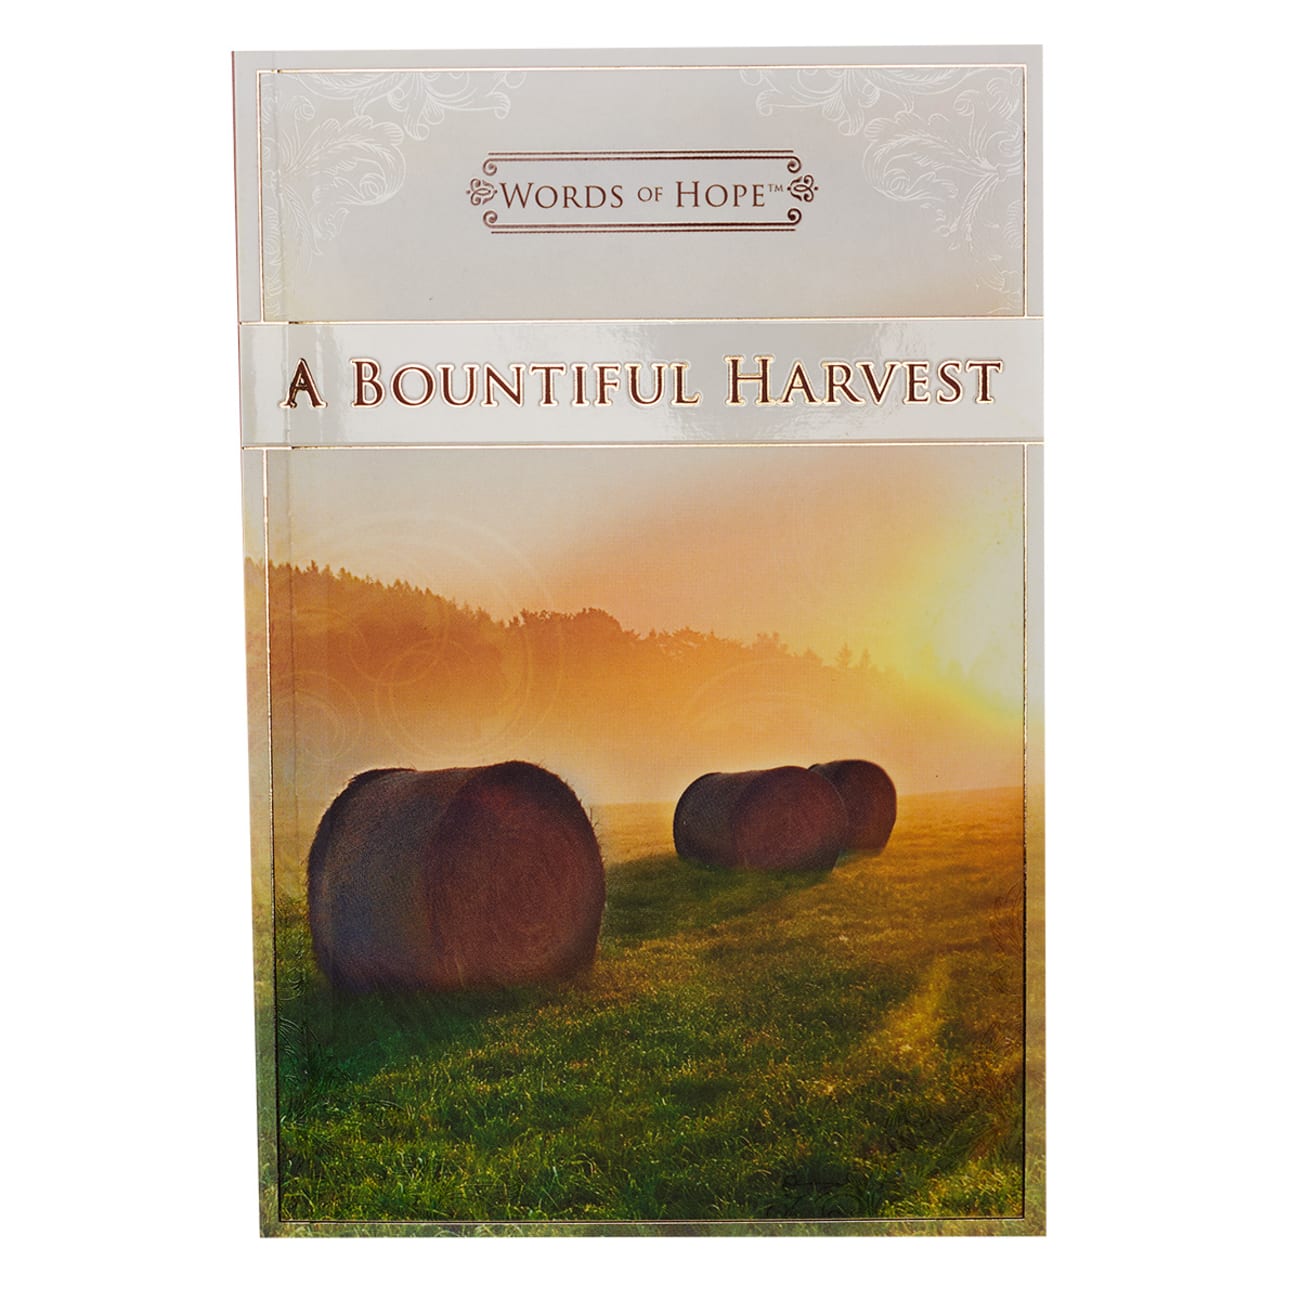 The Bountiful Harvest (Words Of Hope Series) Paperback